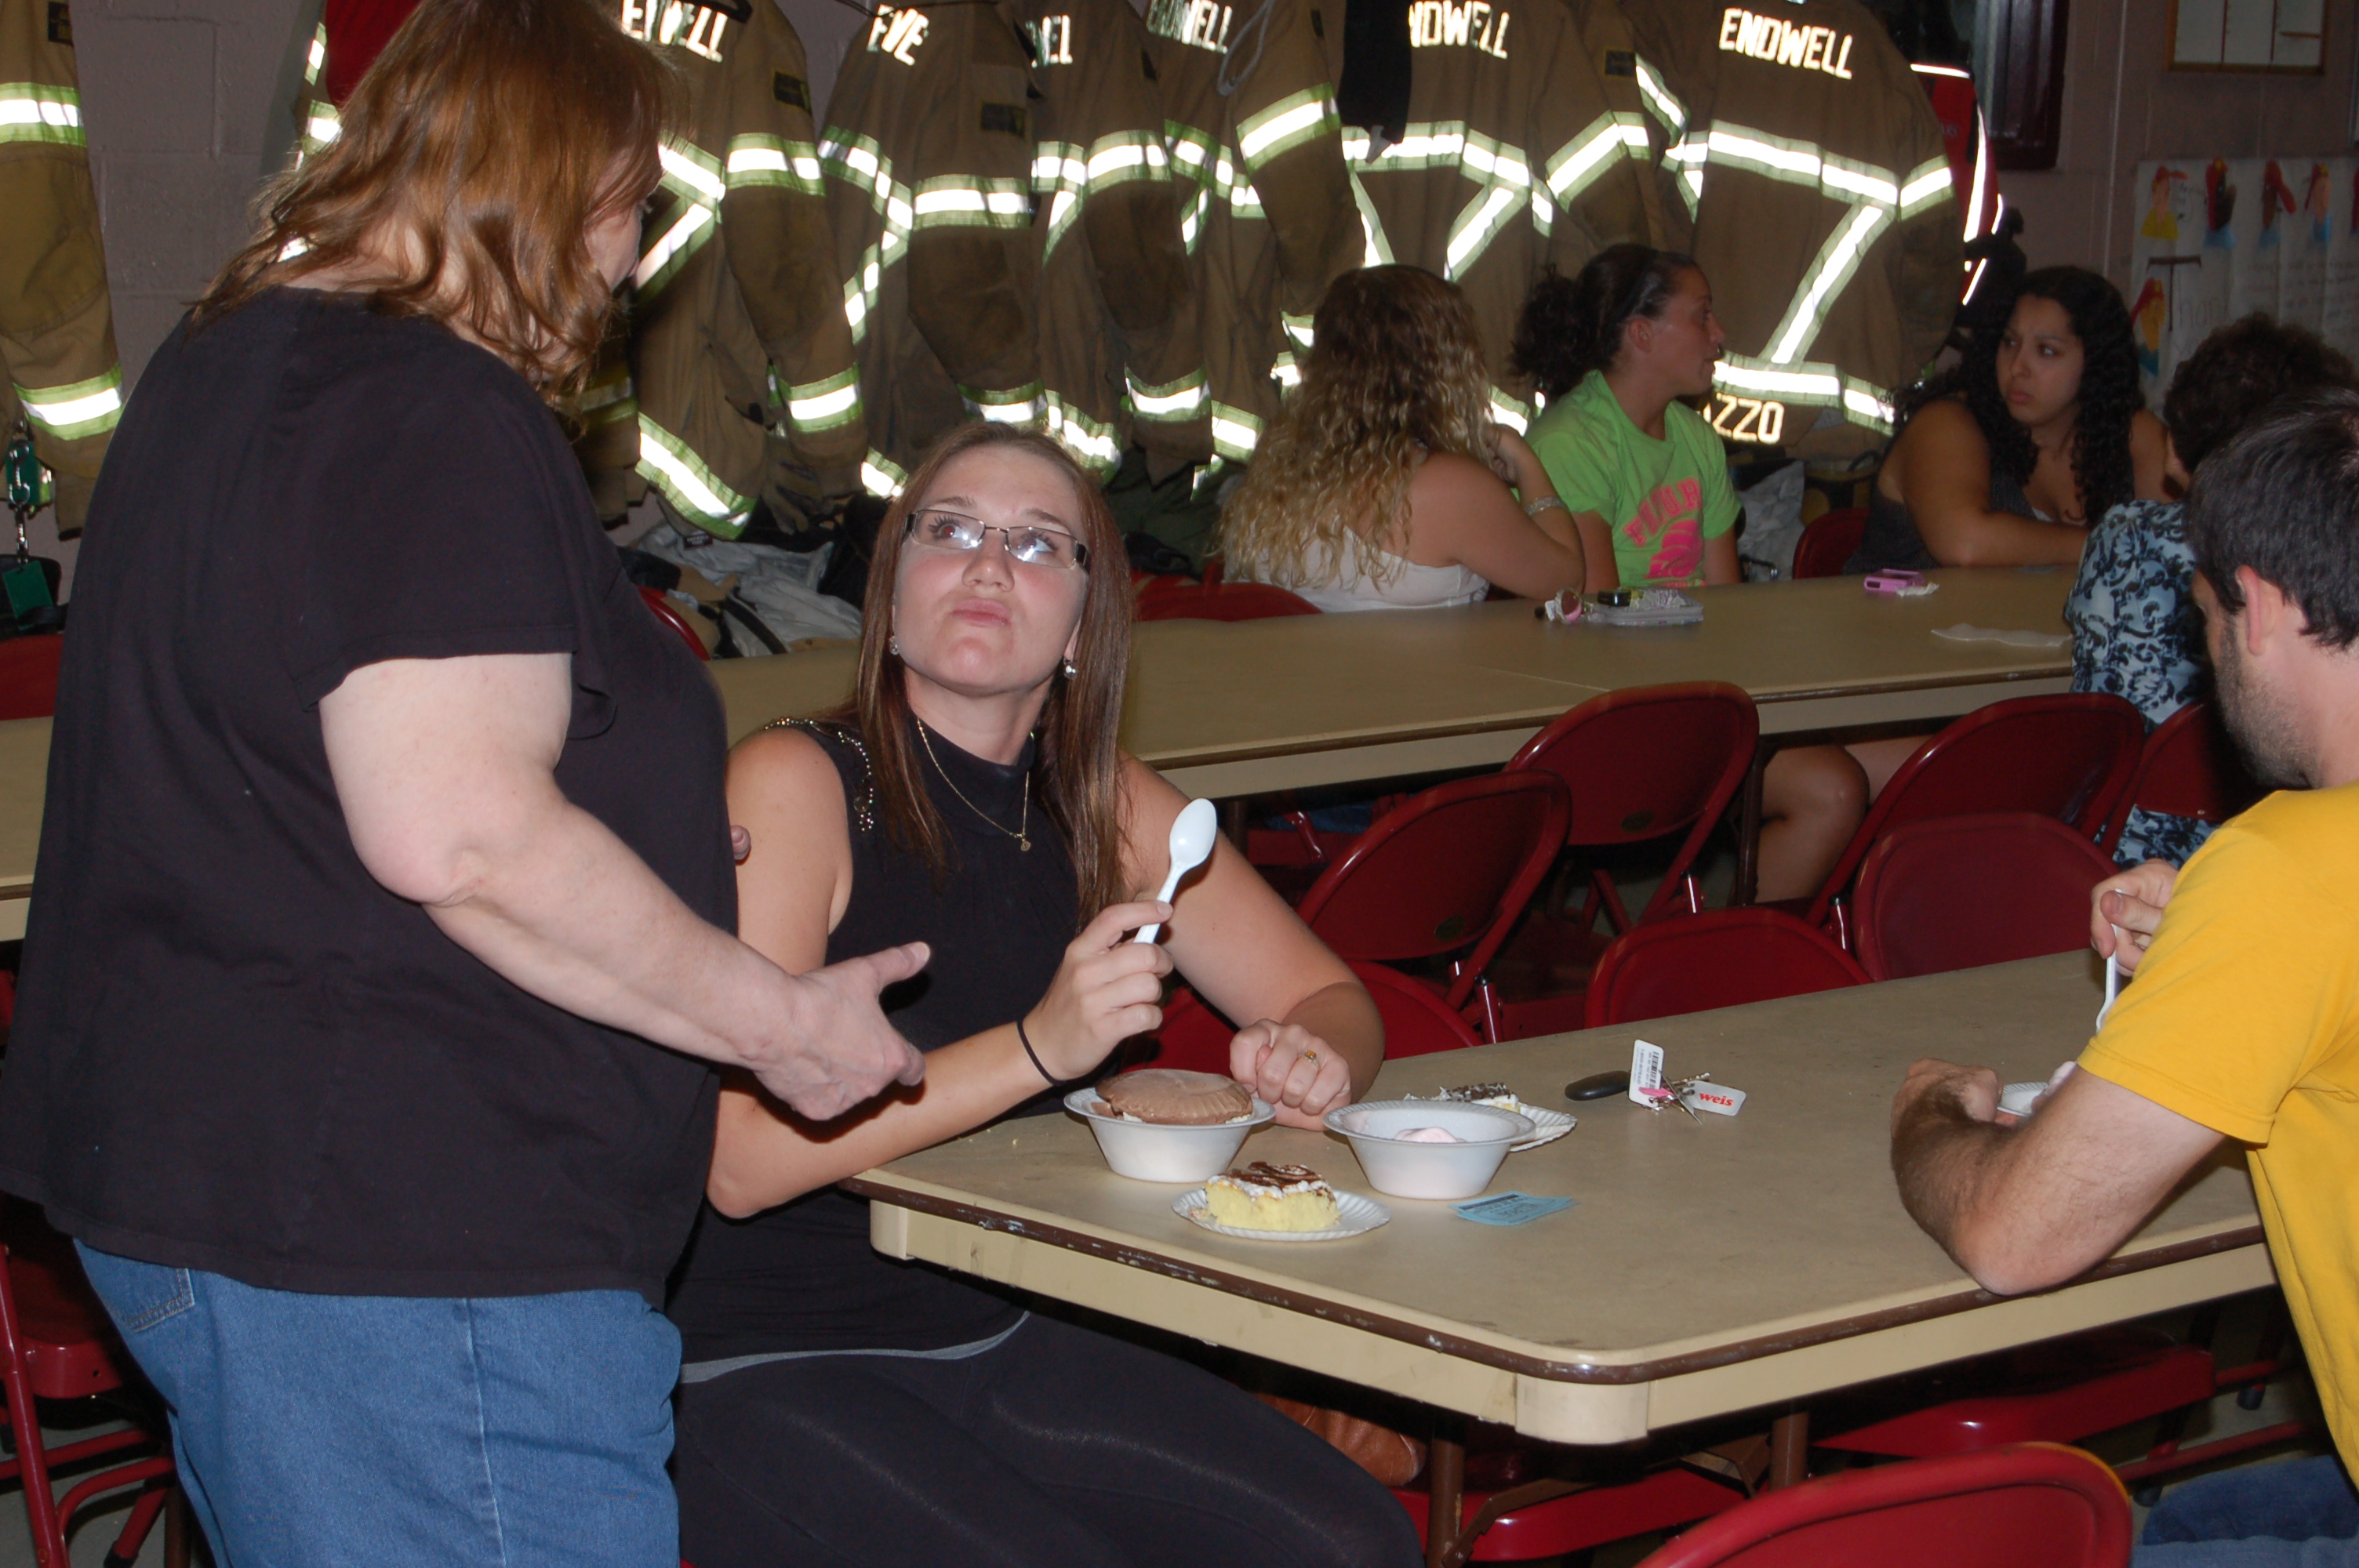 07-13-11  Other - Ice Cream Social